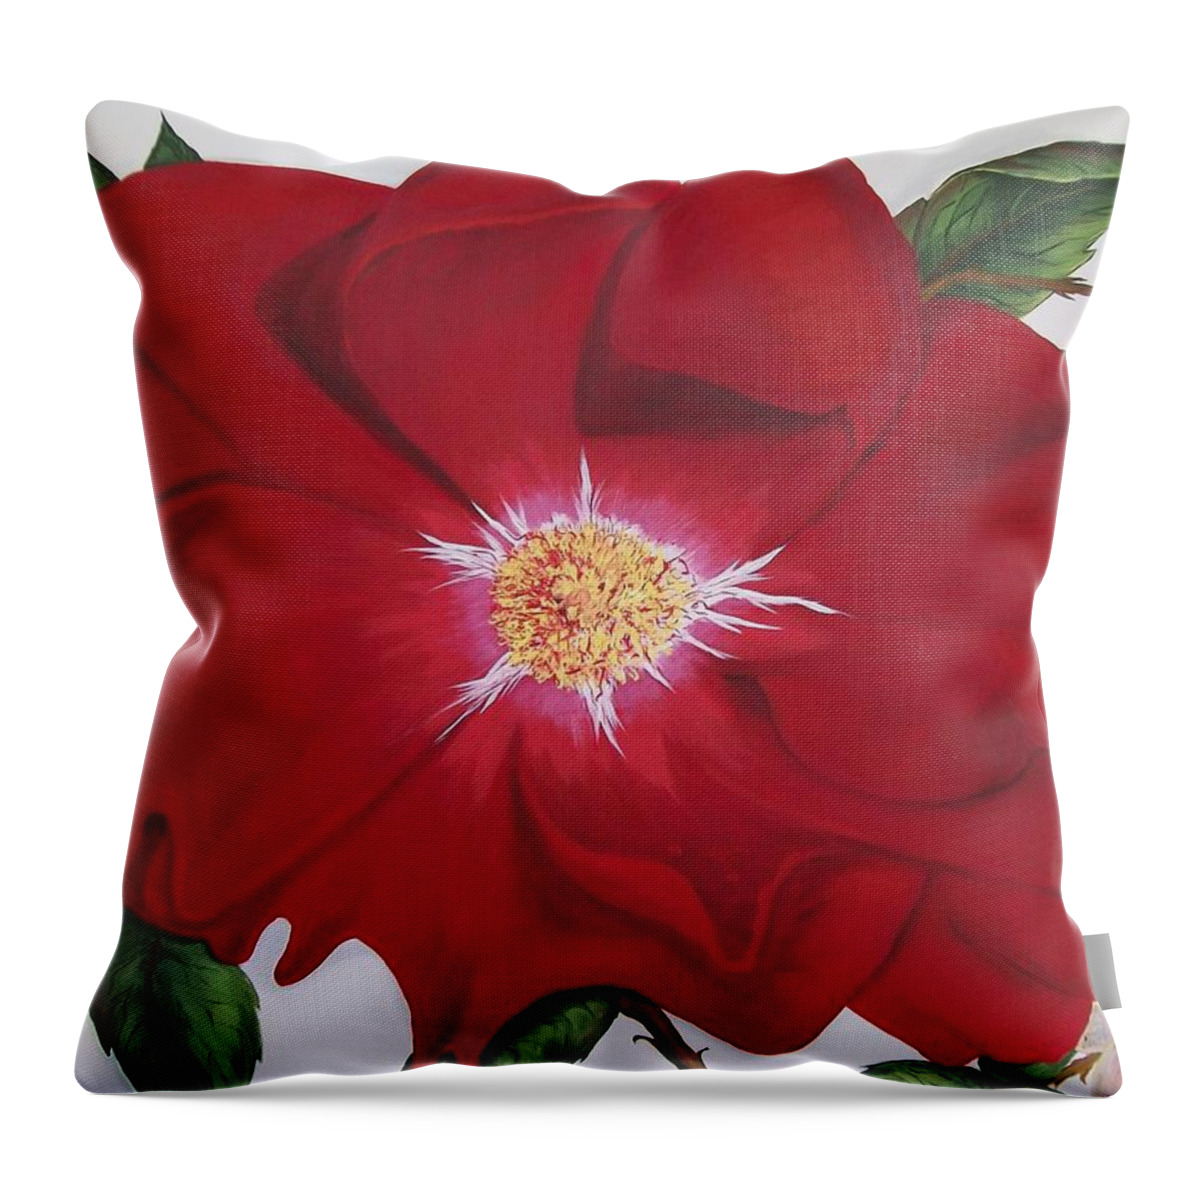 Flower Throw Pillow featuring the painting Dortmund Climber Rose by Sharon Duguay